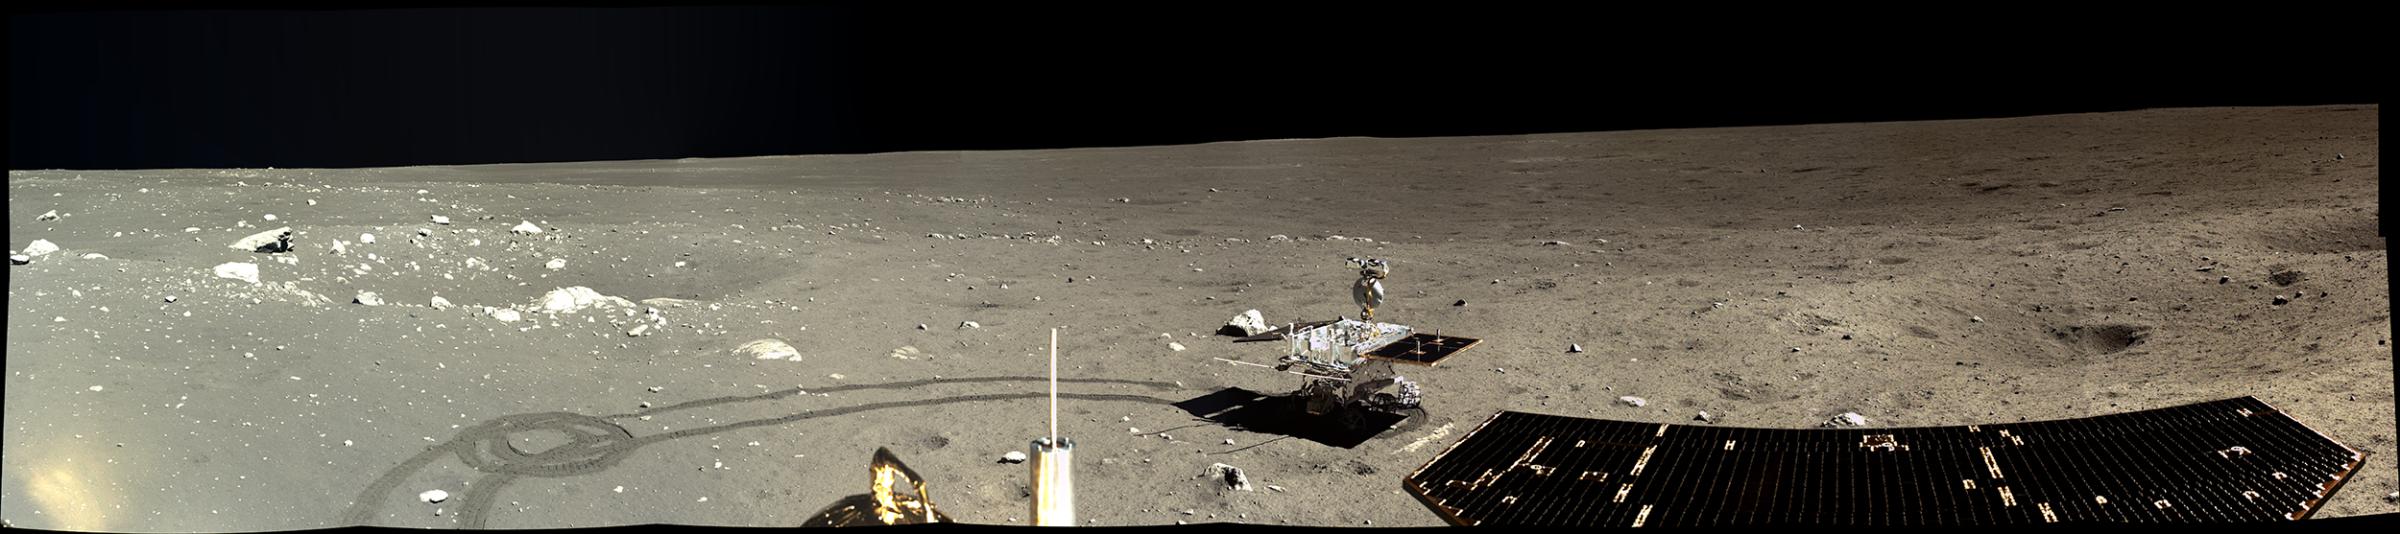 Part of a full 360-degree panorama taken by the Chang'e 3 lander on Dec. 17, 2013, three days after landing.